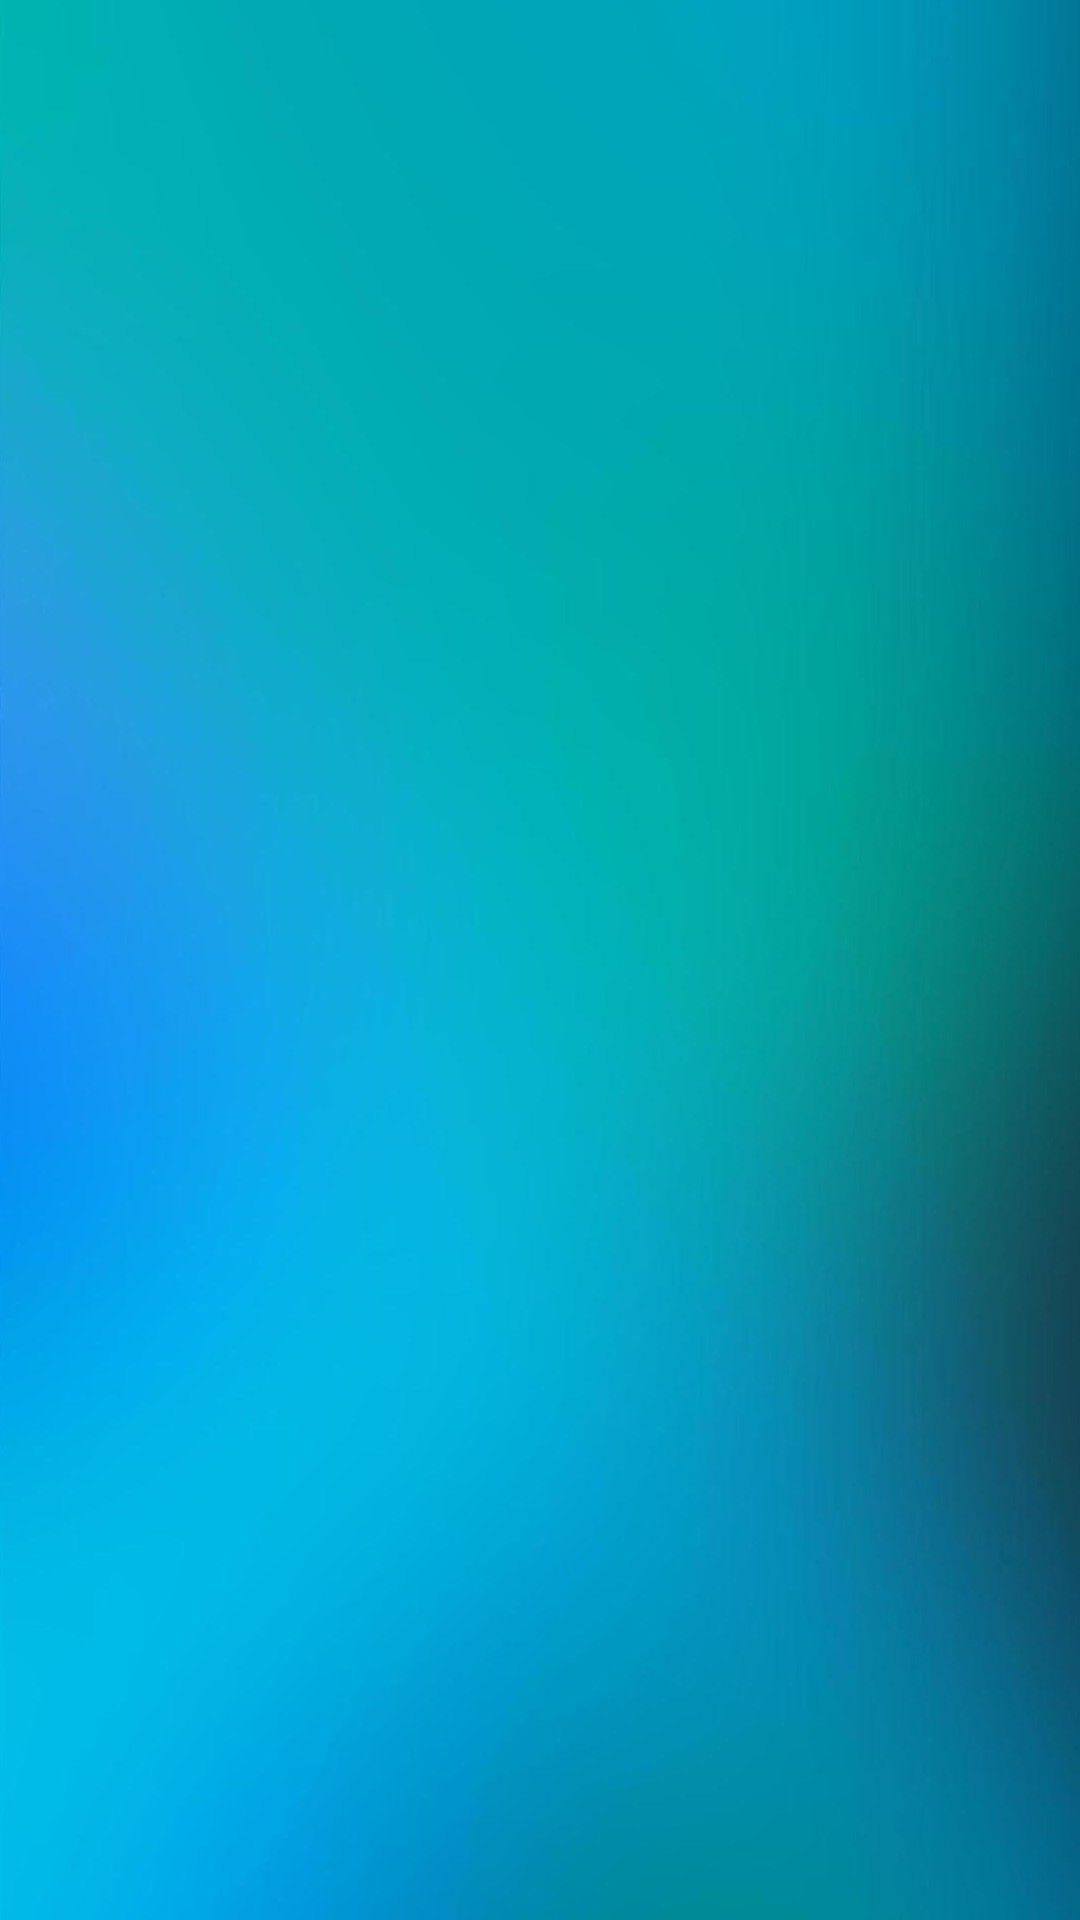 Green and Blue Gradient Wallpapers - Top Free Green and Blue Gradient  Backgrounds - WallpaperAccess